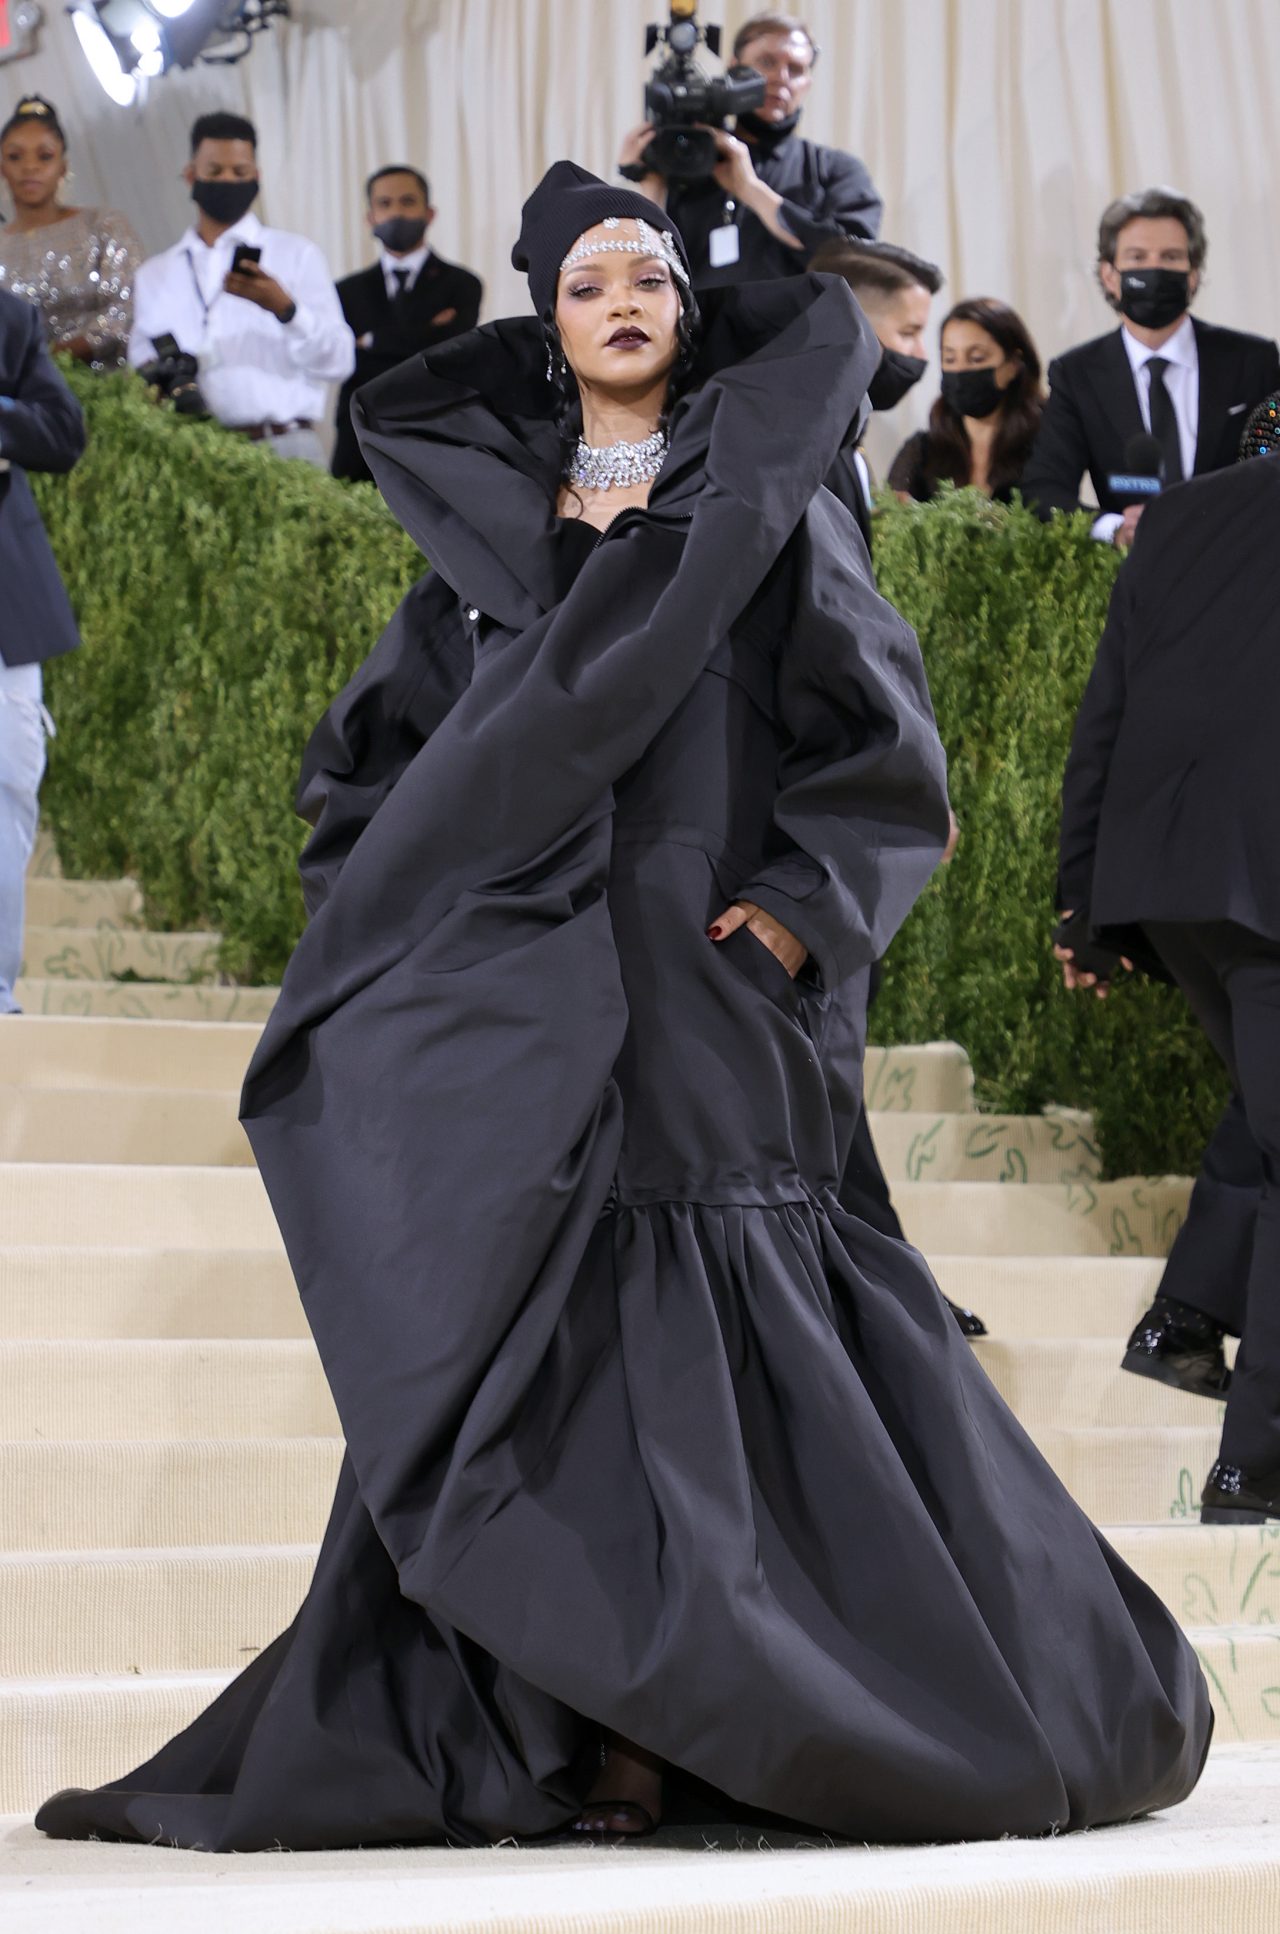 NEW YORK, NEW YORK - SEPTEMBER 13: Rihanna attends The 2021 Met Gala Celebrating In America: A Lexicon Of Fashion at Metropolitan Museum of Art on September 13, 2021 in New York City. (Photo by Mike Coppola/Getty Images)